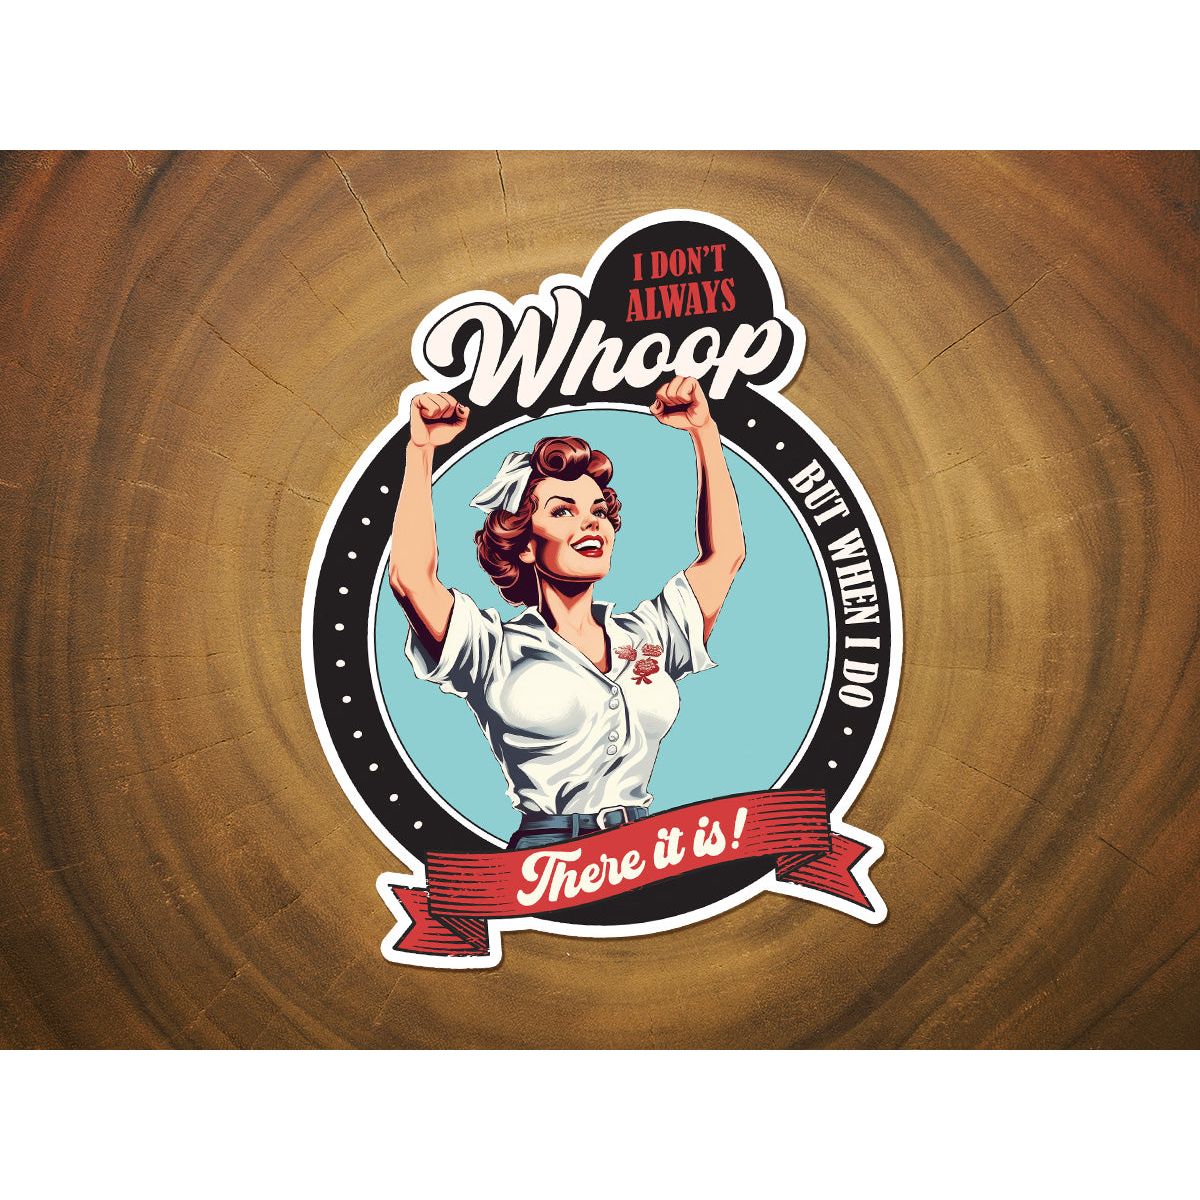 Whoop There It Is | Funny Vinyl Sticker